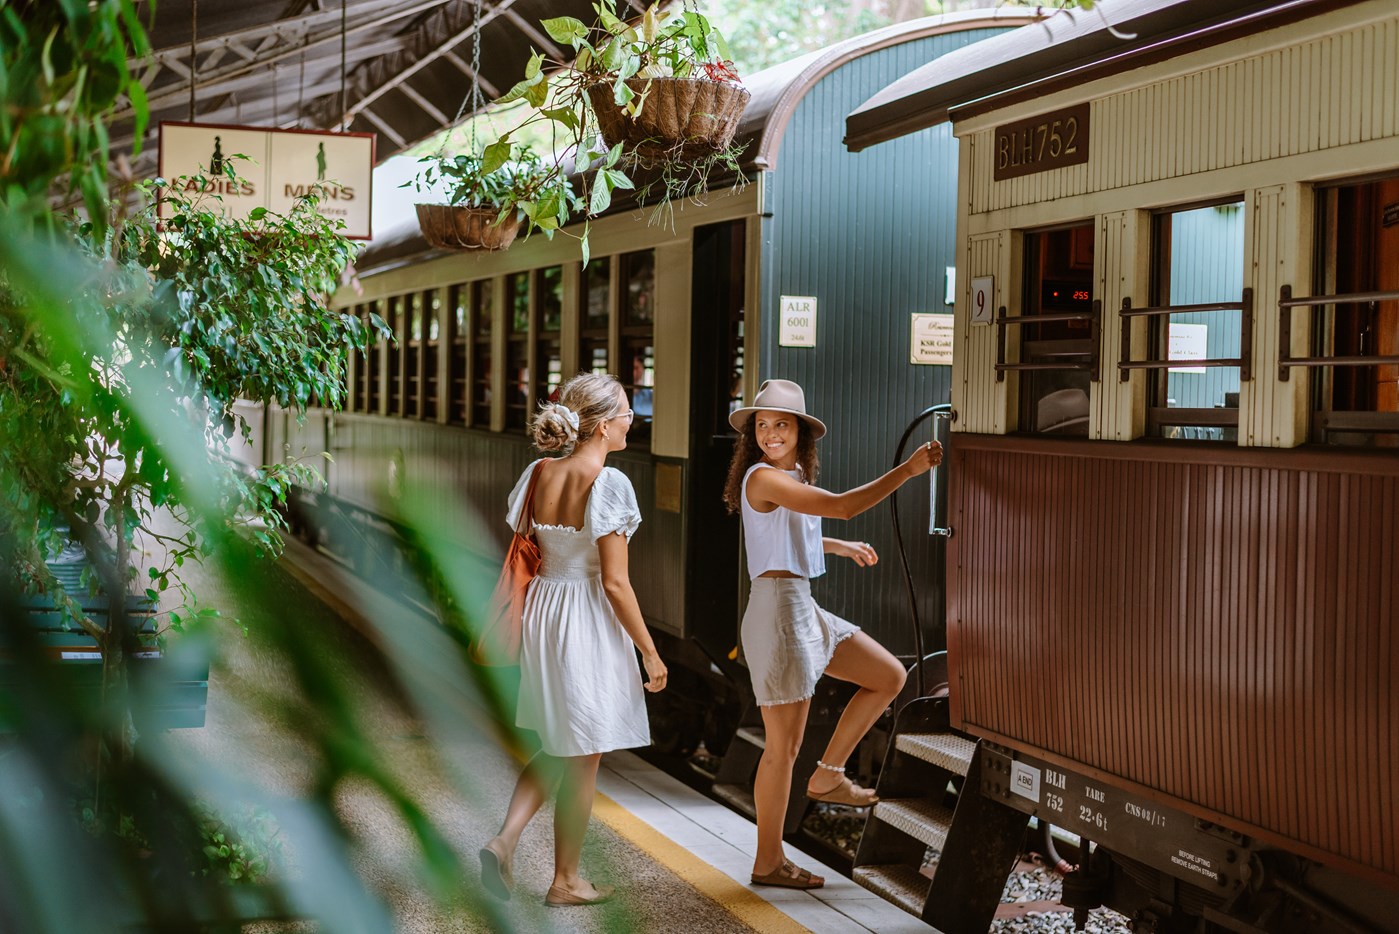 Two people stepping onto a vintage train at a leafy station